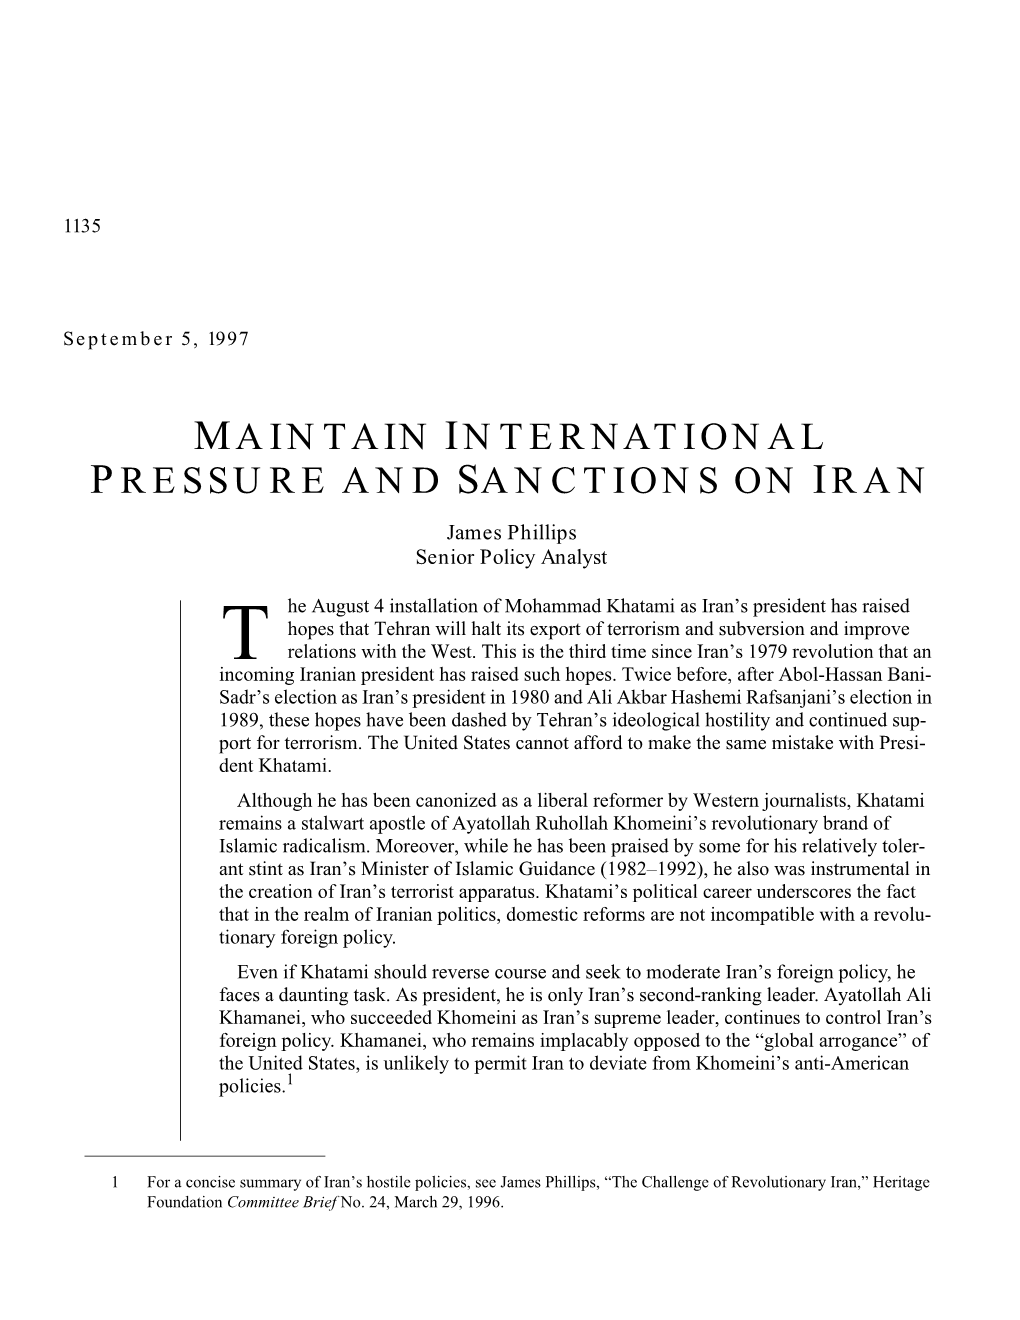 Maintain International Pressure and Sanctions on Iran